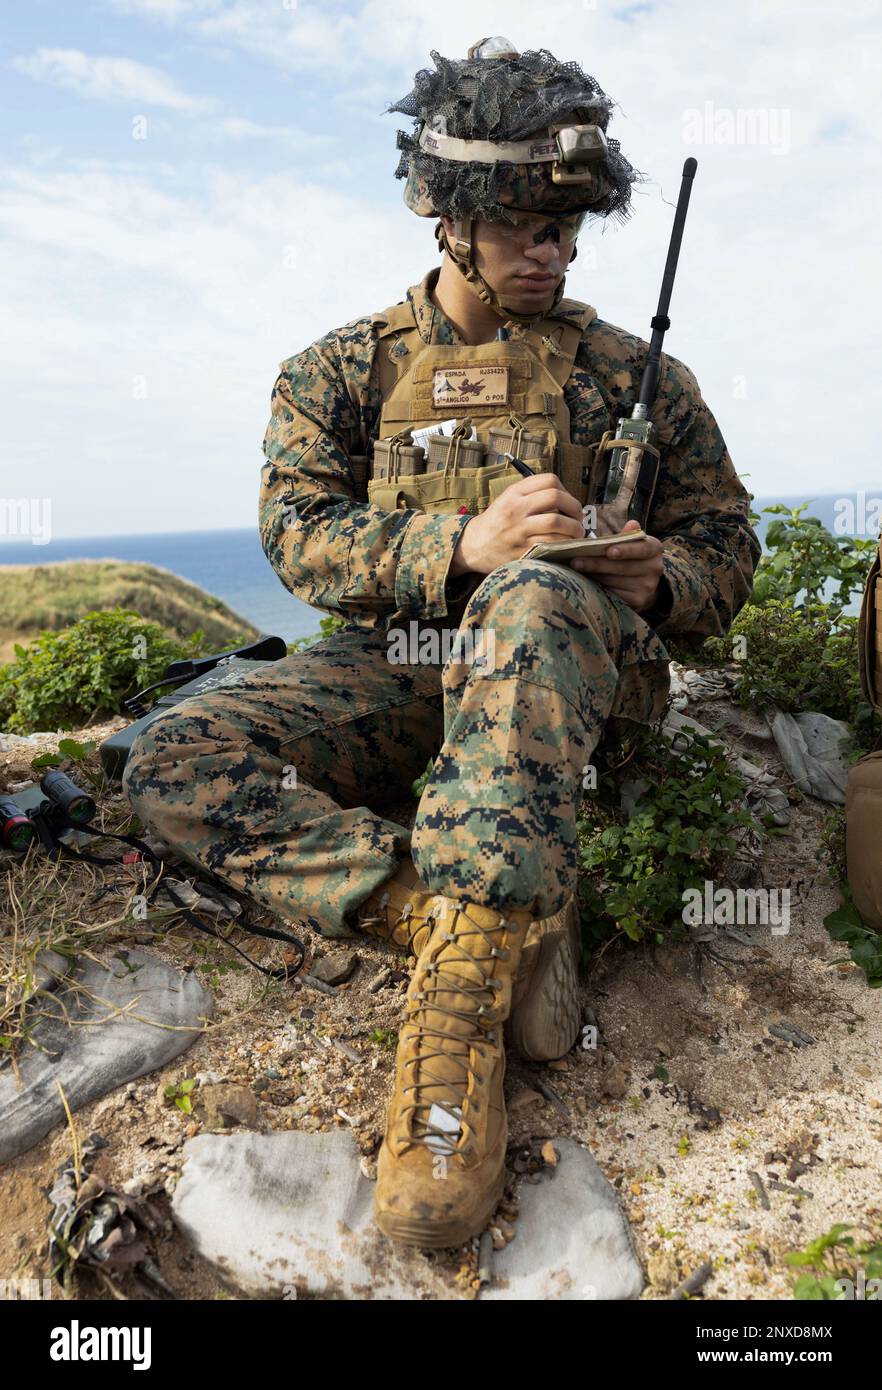 U.S. Marine Corps Lance Cpl. Ricardo Espada, a fire support Marine with 5th Air Naval Gunfire Liaison Company, command element, 31st Marine Expeditionary Unit, plots target data during a tactical air control party at W-174 Live Fire Range, Okinawa, Japan, Jan. 10, 2023. The training provided an opportunity to work in a dynamic tactical situation and refine target plotting skills. The 31st MEU, the Marine Corps’s only continuously forward- deployed MEU, provides a flexible and lethal force ready to perform a wide range of military operations as the premiere crisis response force in the Indo-Pac Stock Photo